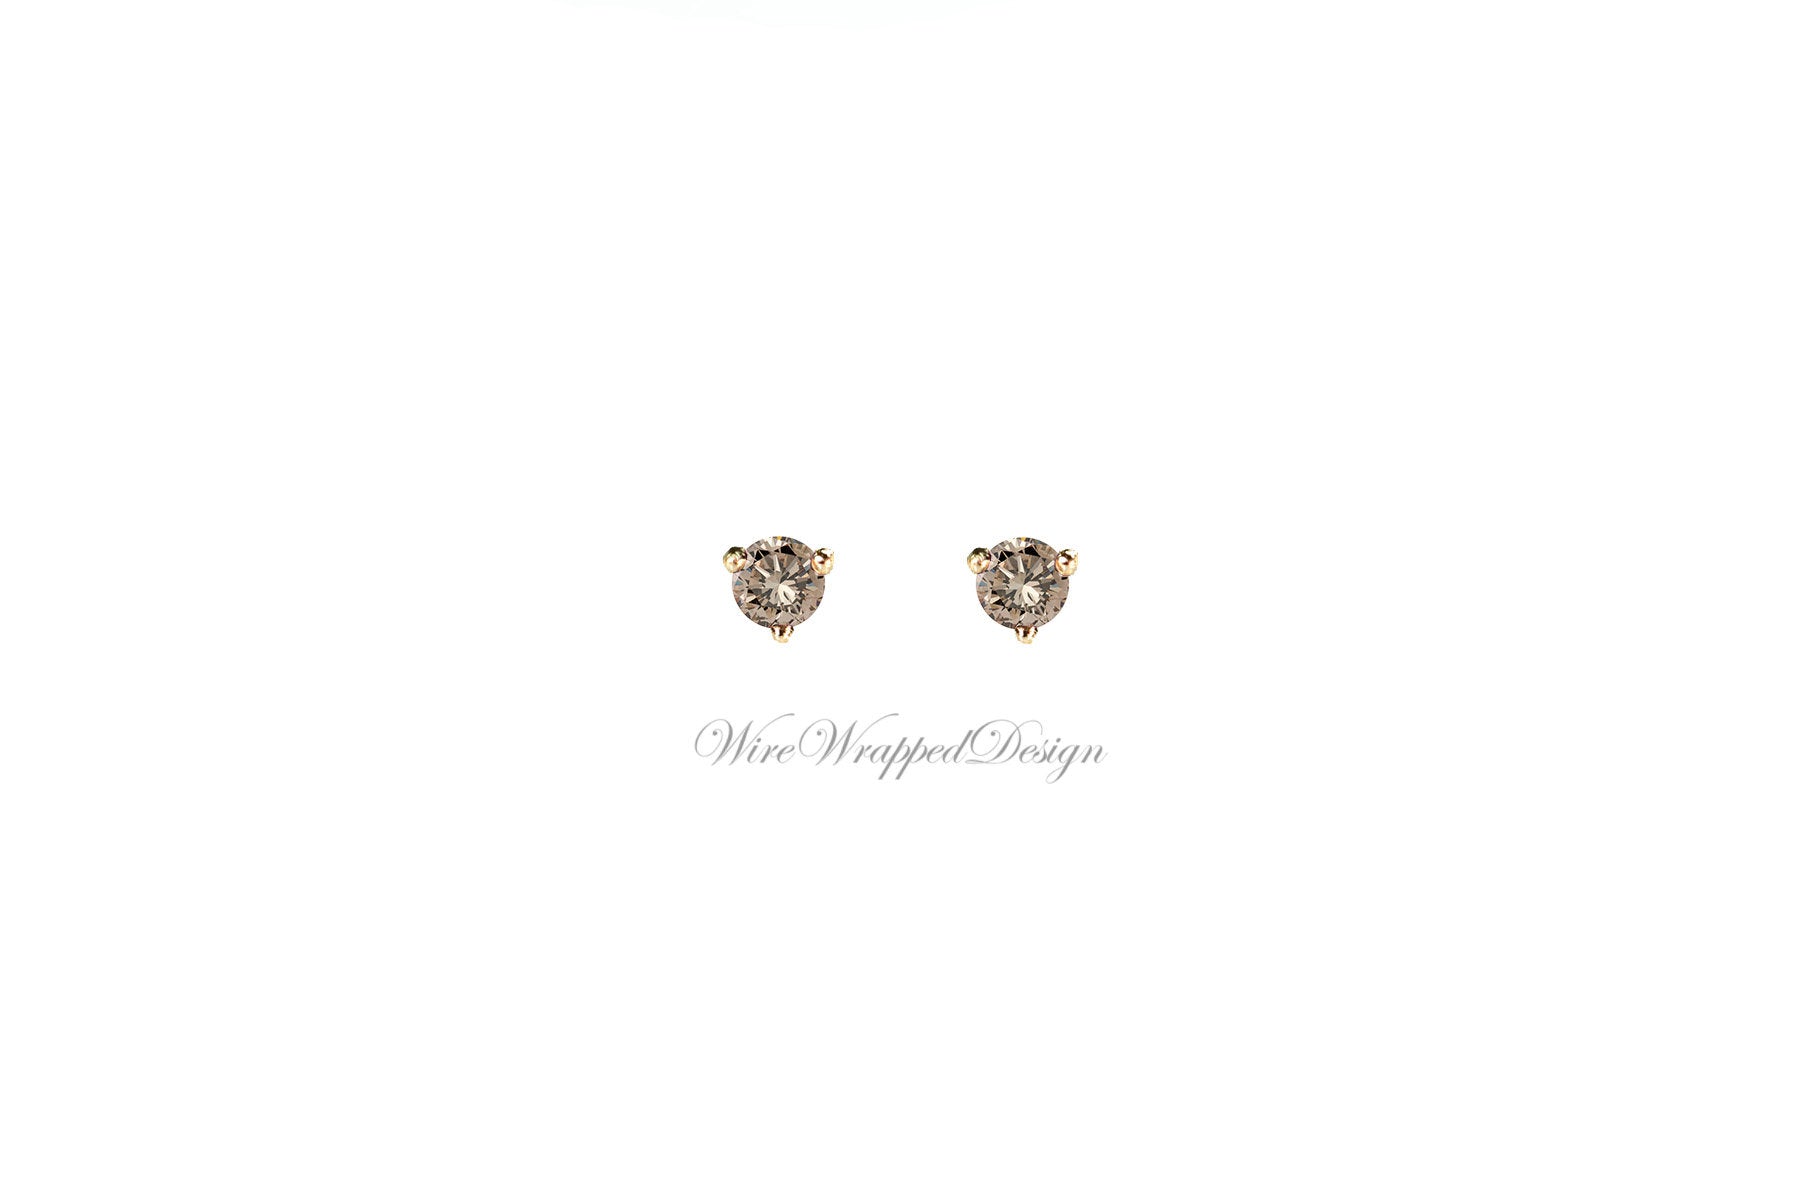 PAIR Genuine CHAMPAGNE DIAMOND Earrings Studs 3mm 0.2tcw Martini 14k Solid Gold (Yellow, Rose, White) Platinum Silver Cartilage Tragus Brown